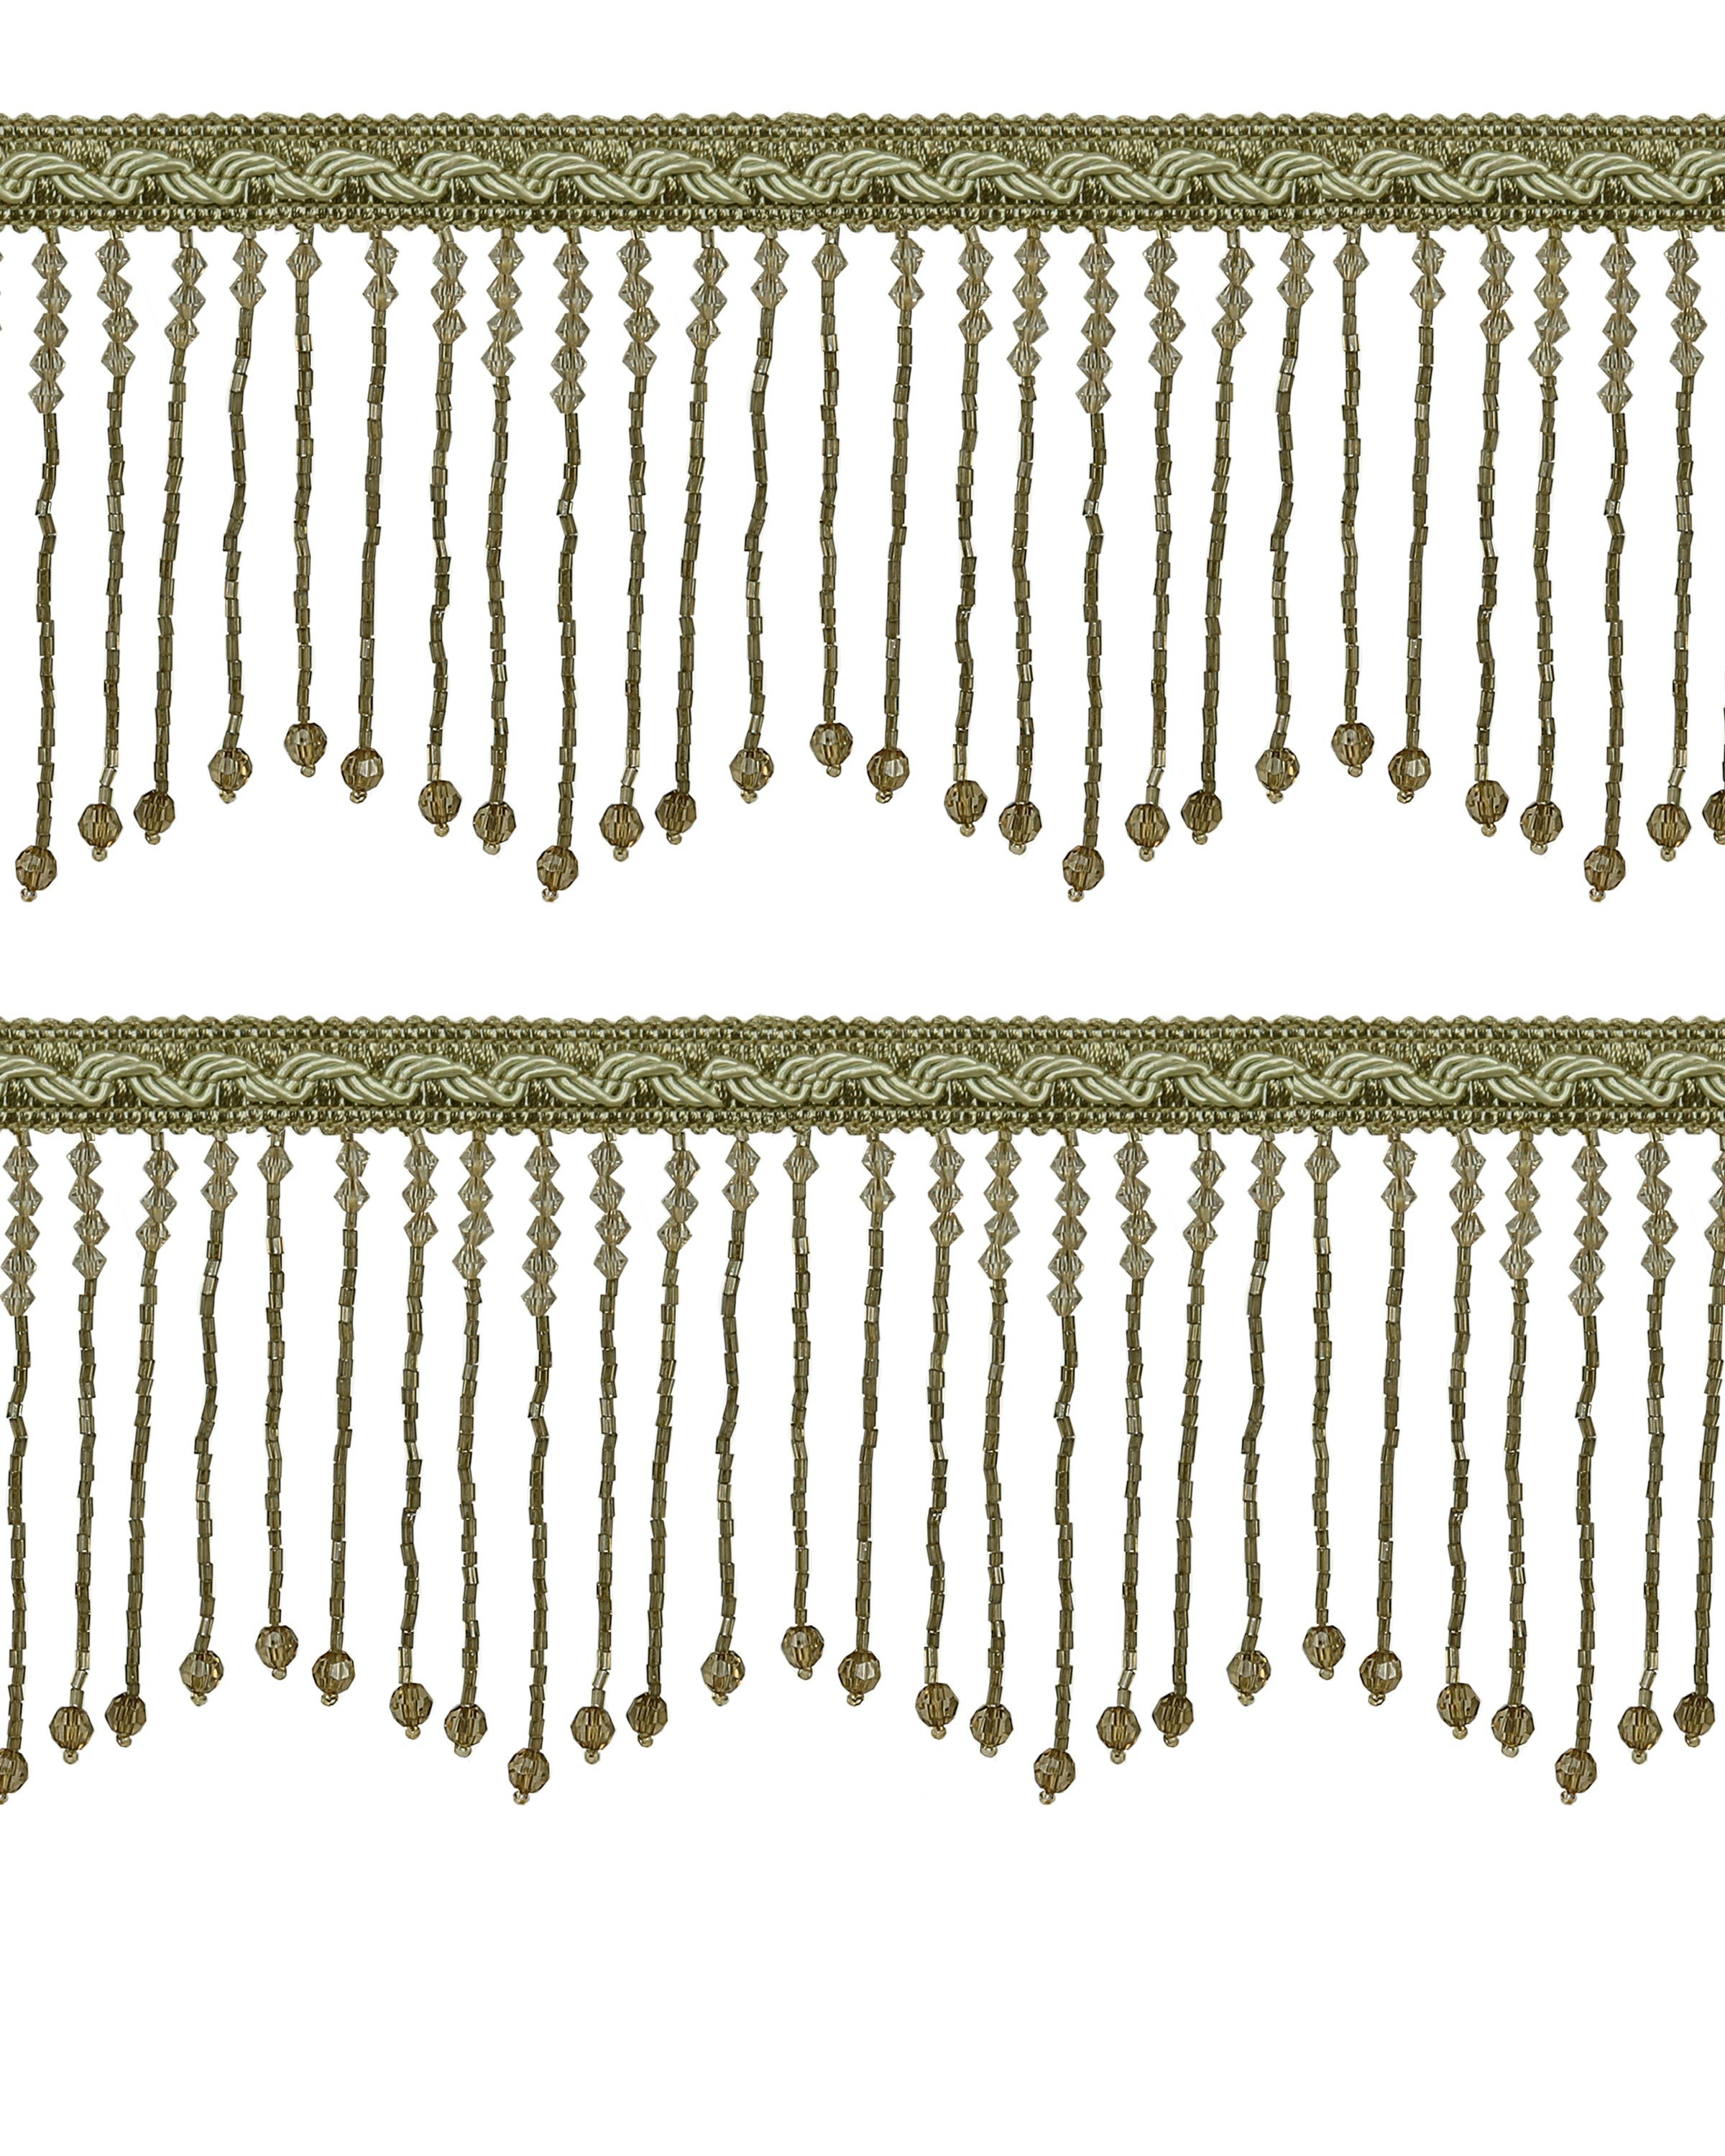 Fringe Beading with braid - Pale Green / Gold 150mm Price is for 5 metres